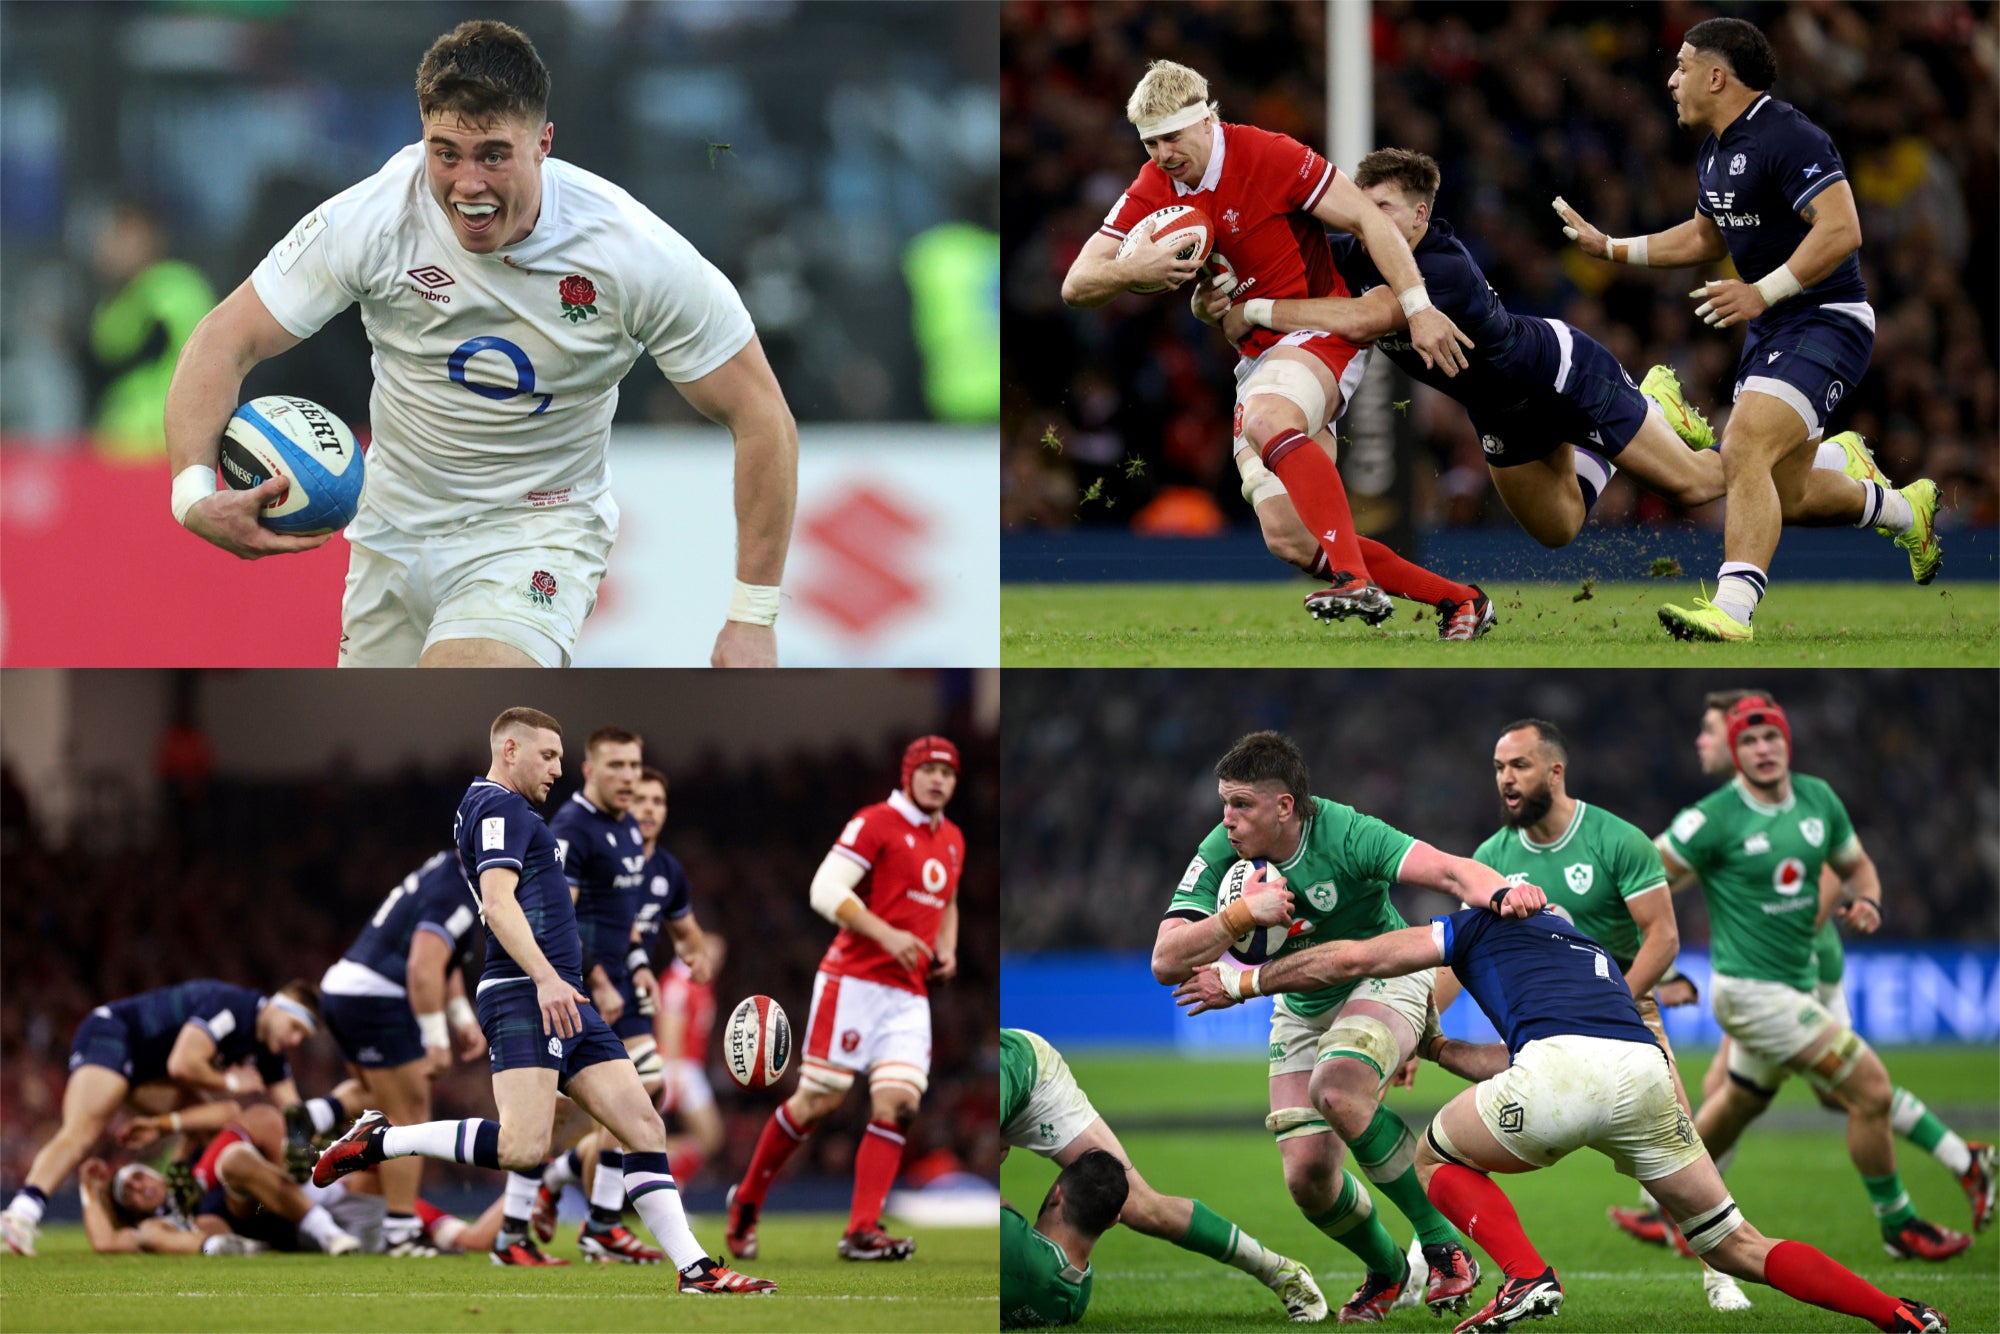 England’s Tommy Freeman (top left), Wales’ Aaron Wainwright (top right), Scotland’s Finn Russell (bottom left) and Ireland’s Joe McCarthy (bottom right) all impressed